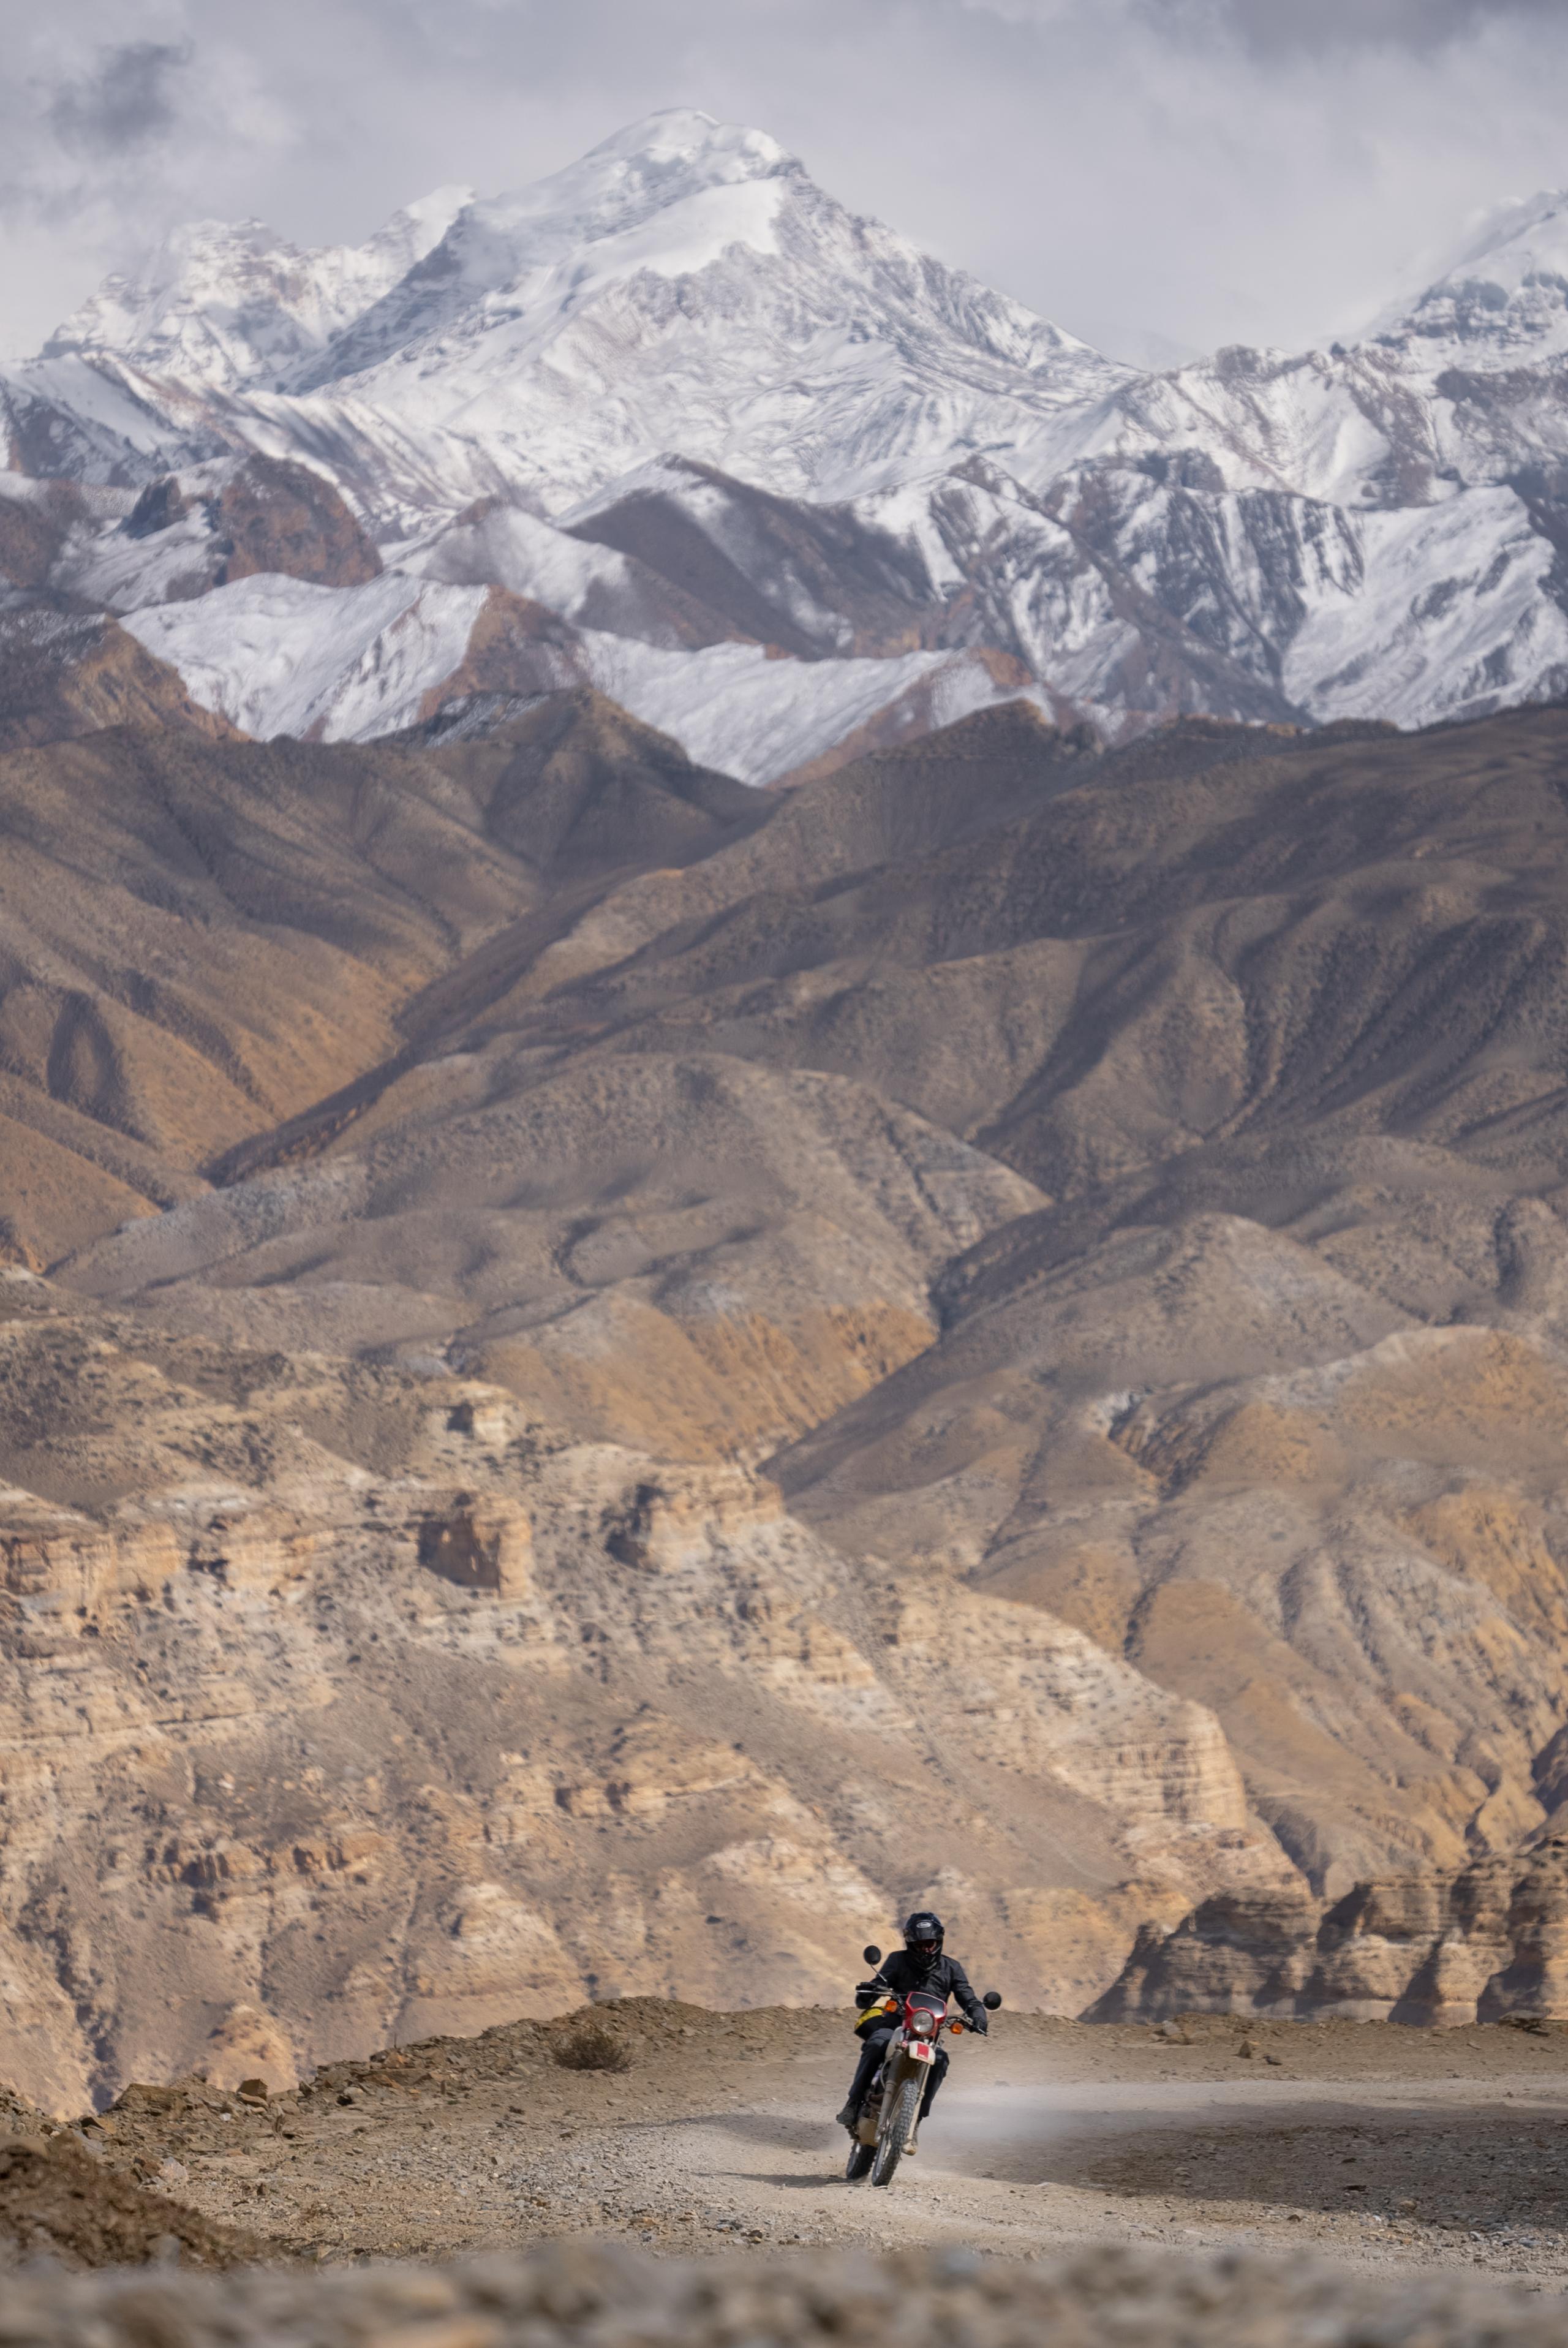 Motorcyclist riding on mountain dirt road with snowy Himalayan mountains in background